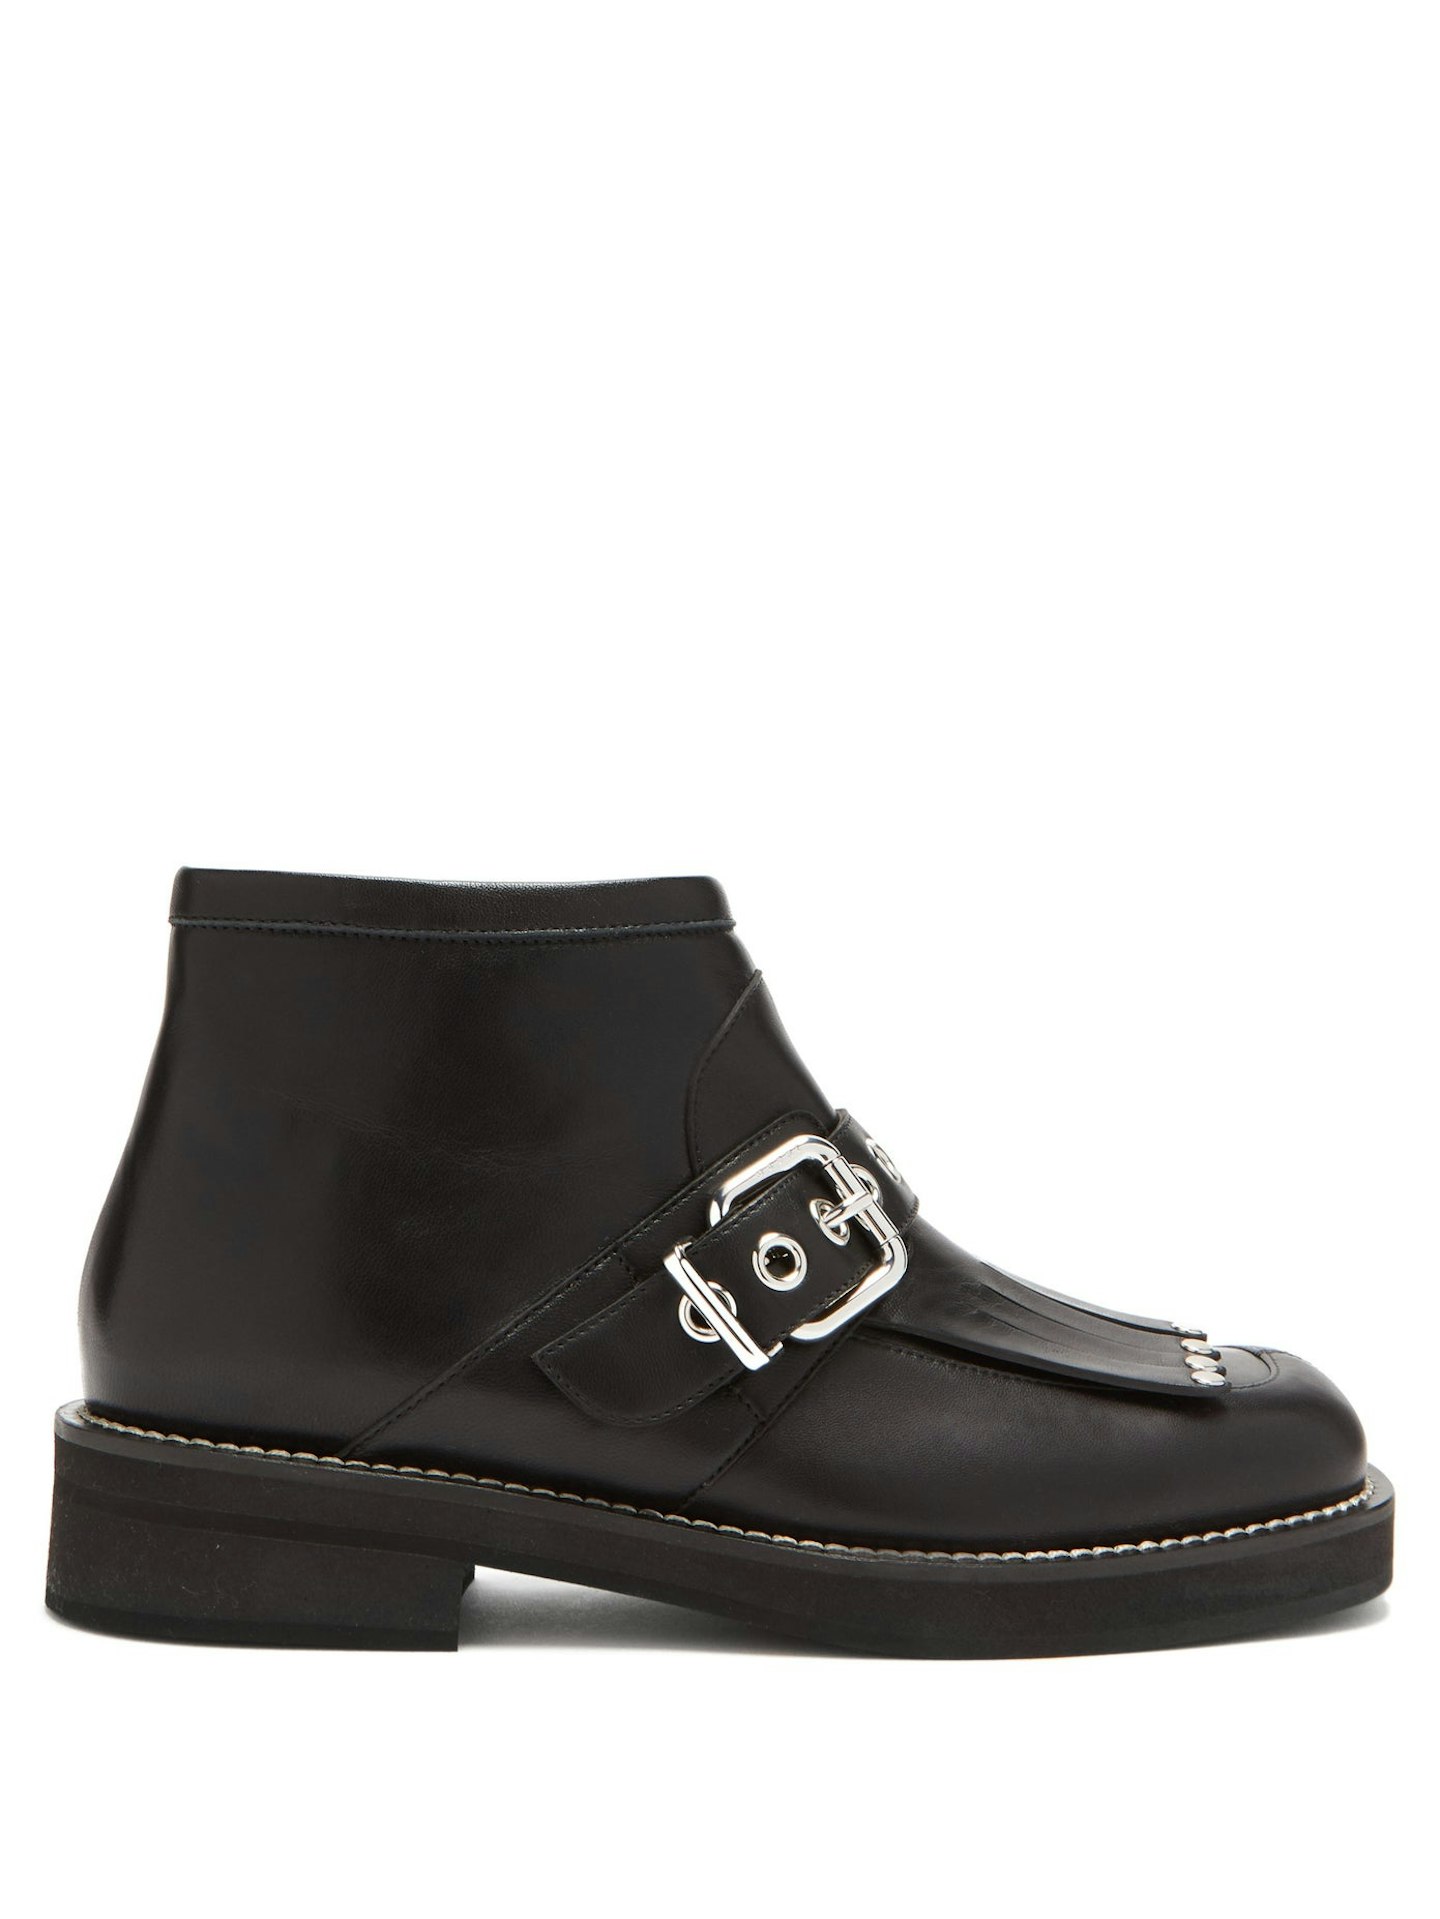 Marni, Fringed Leather Ankle Boots, WAS £830 NOW £498